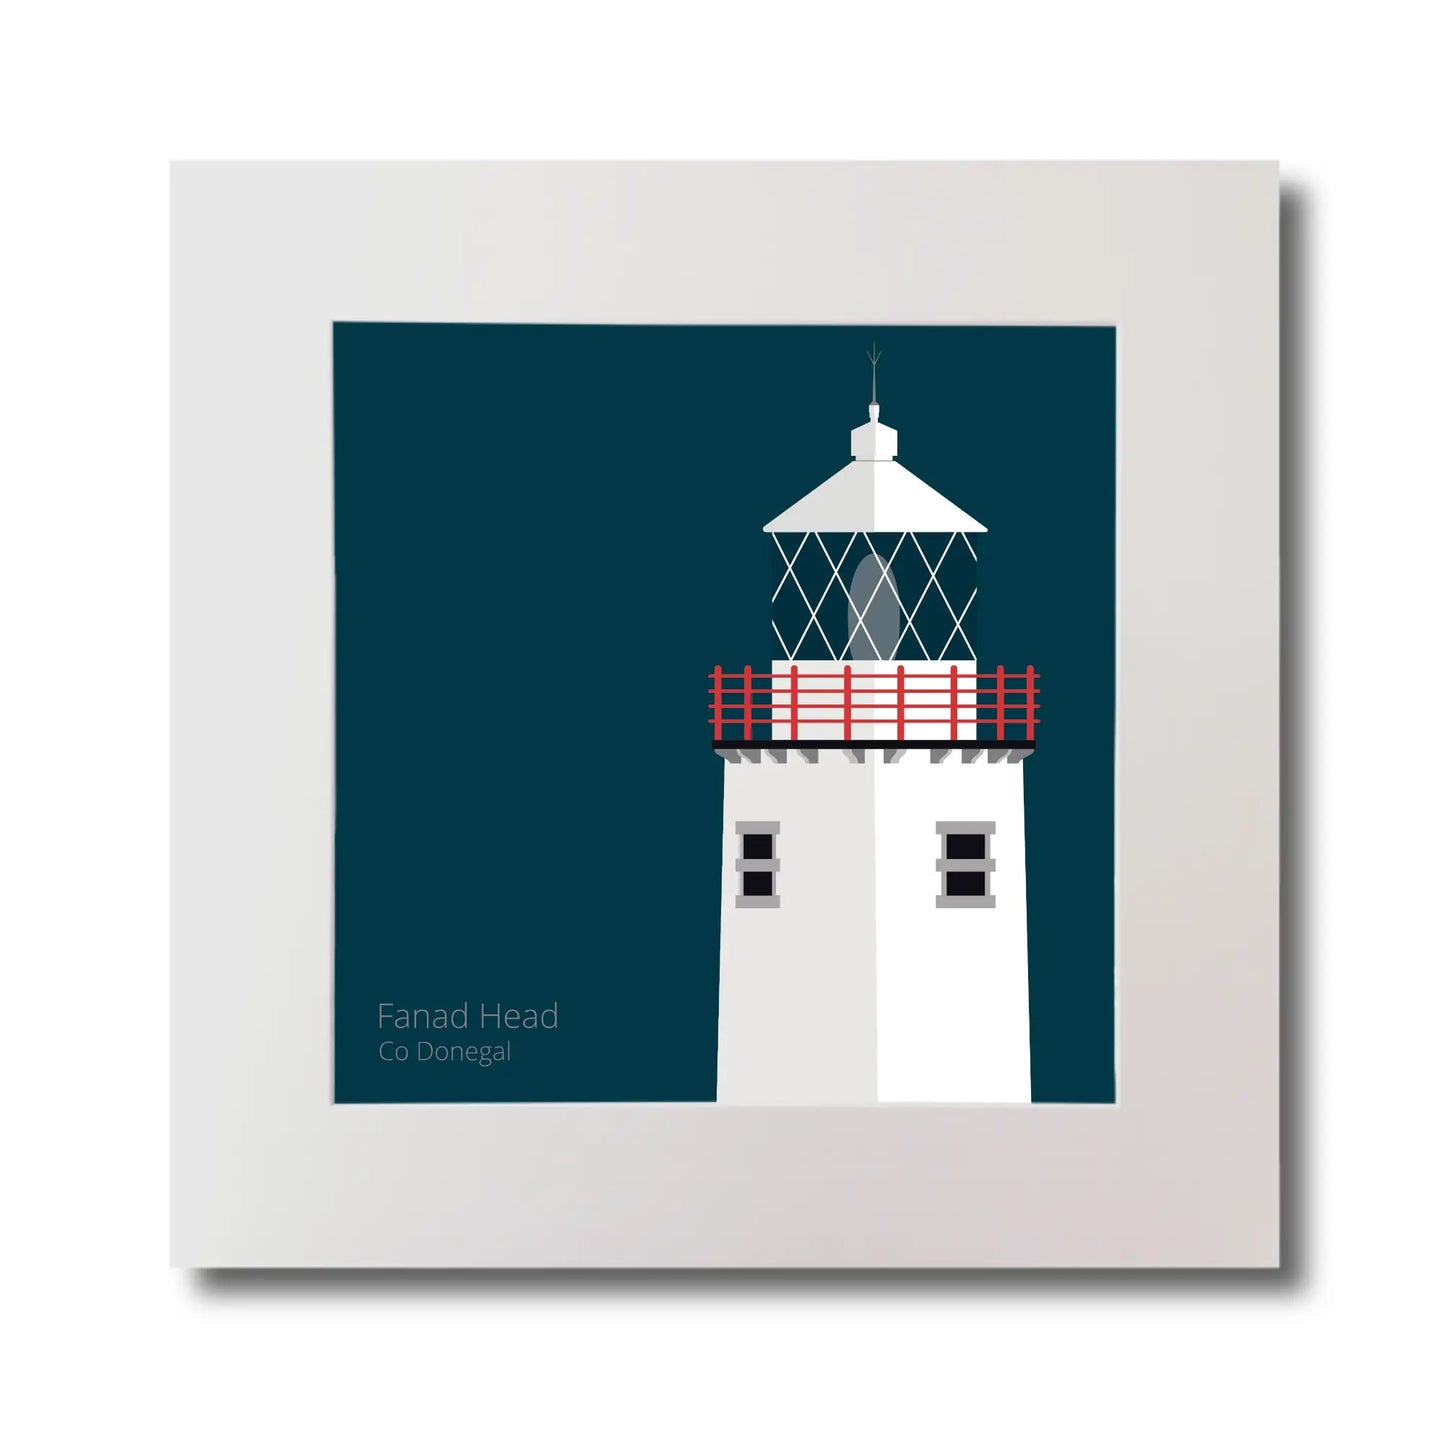 Illustration of Fanad Head lighthouse on a midnight blue background, mounted and measuring 30x30cm.